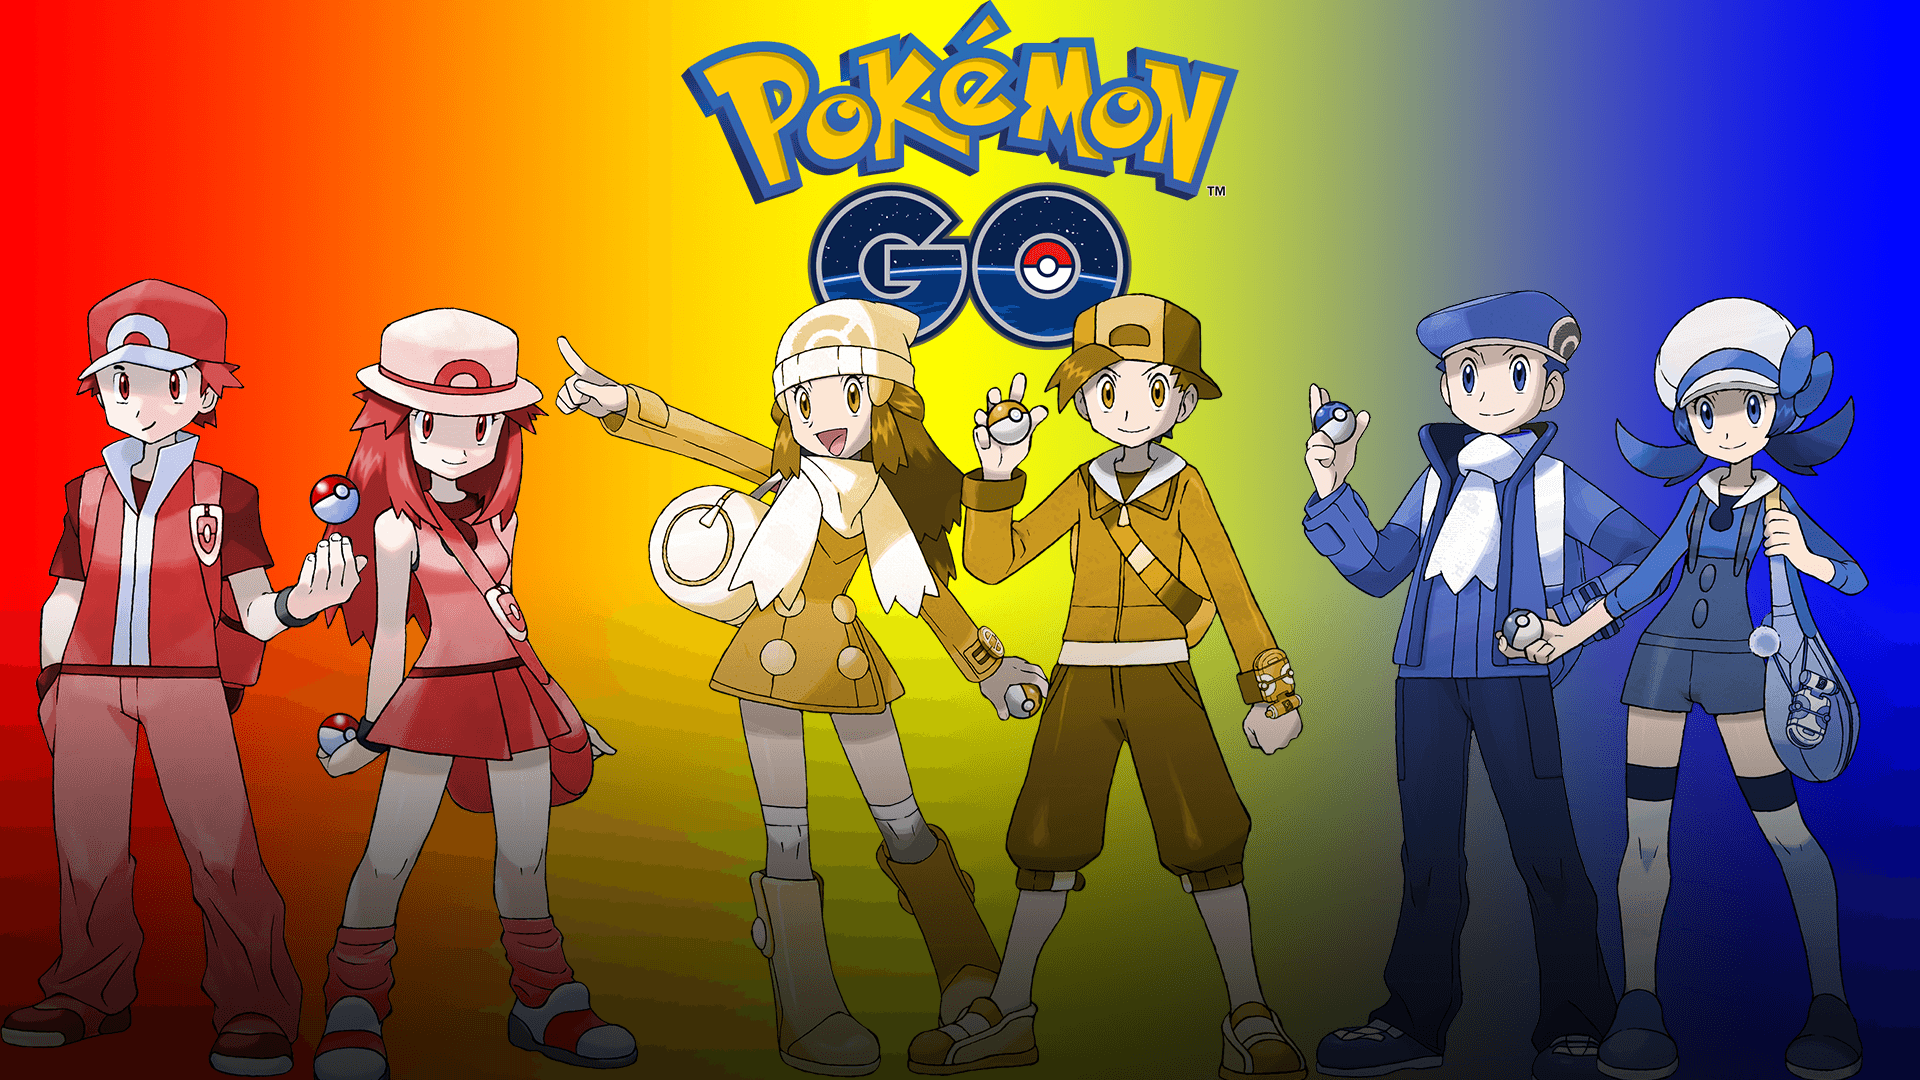 I made a desk 4K wallpapers for pokemon go! So here’s a little